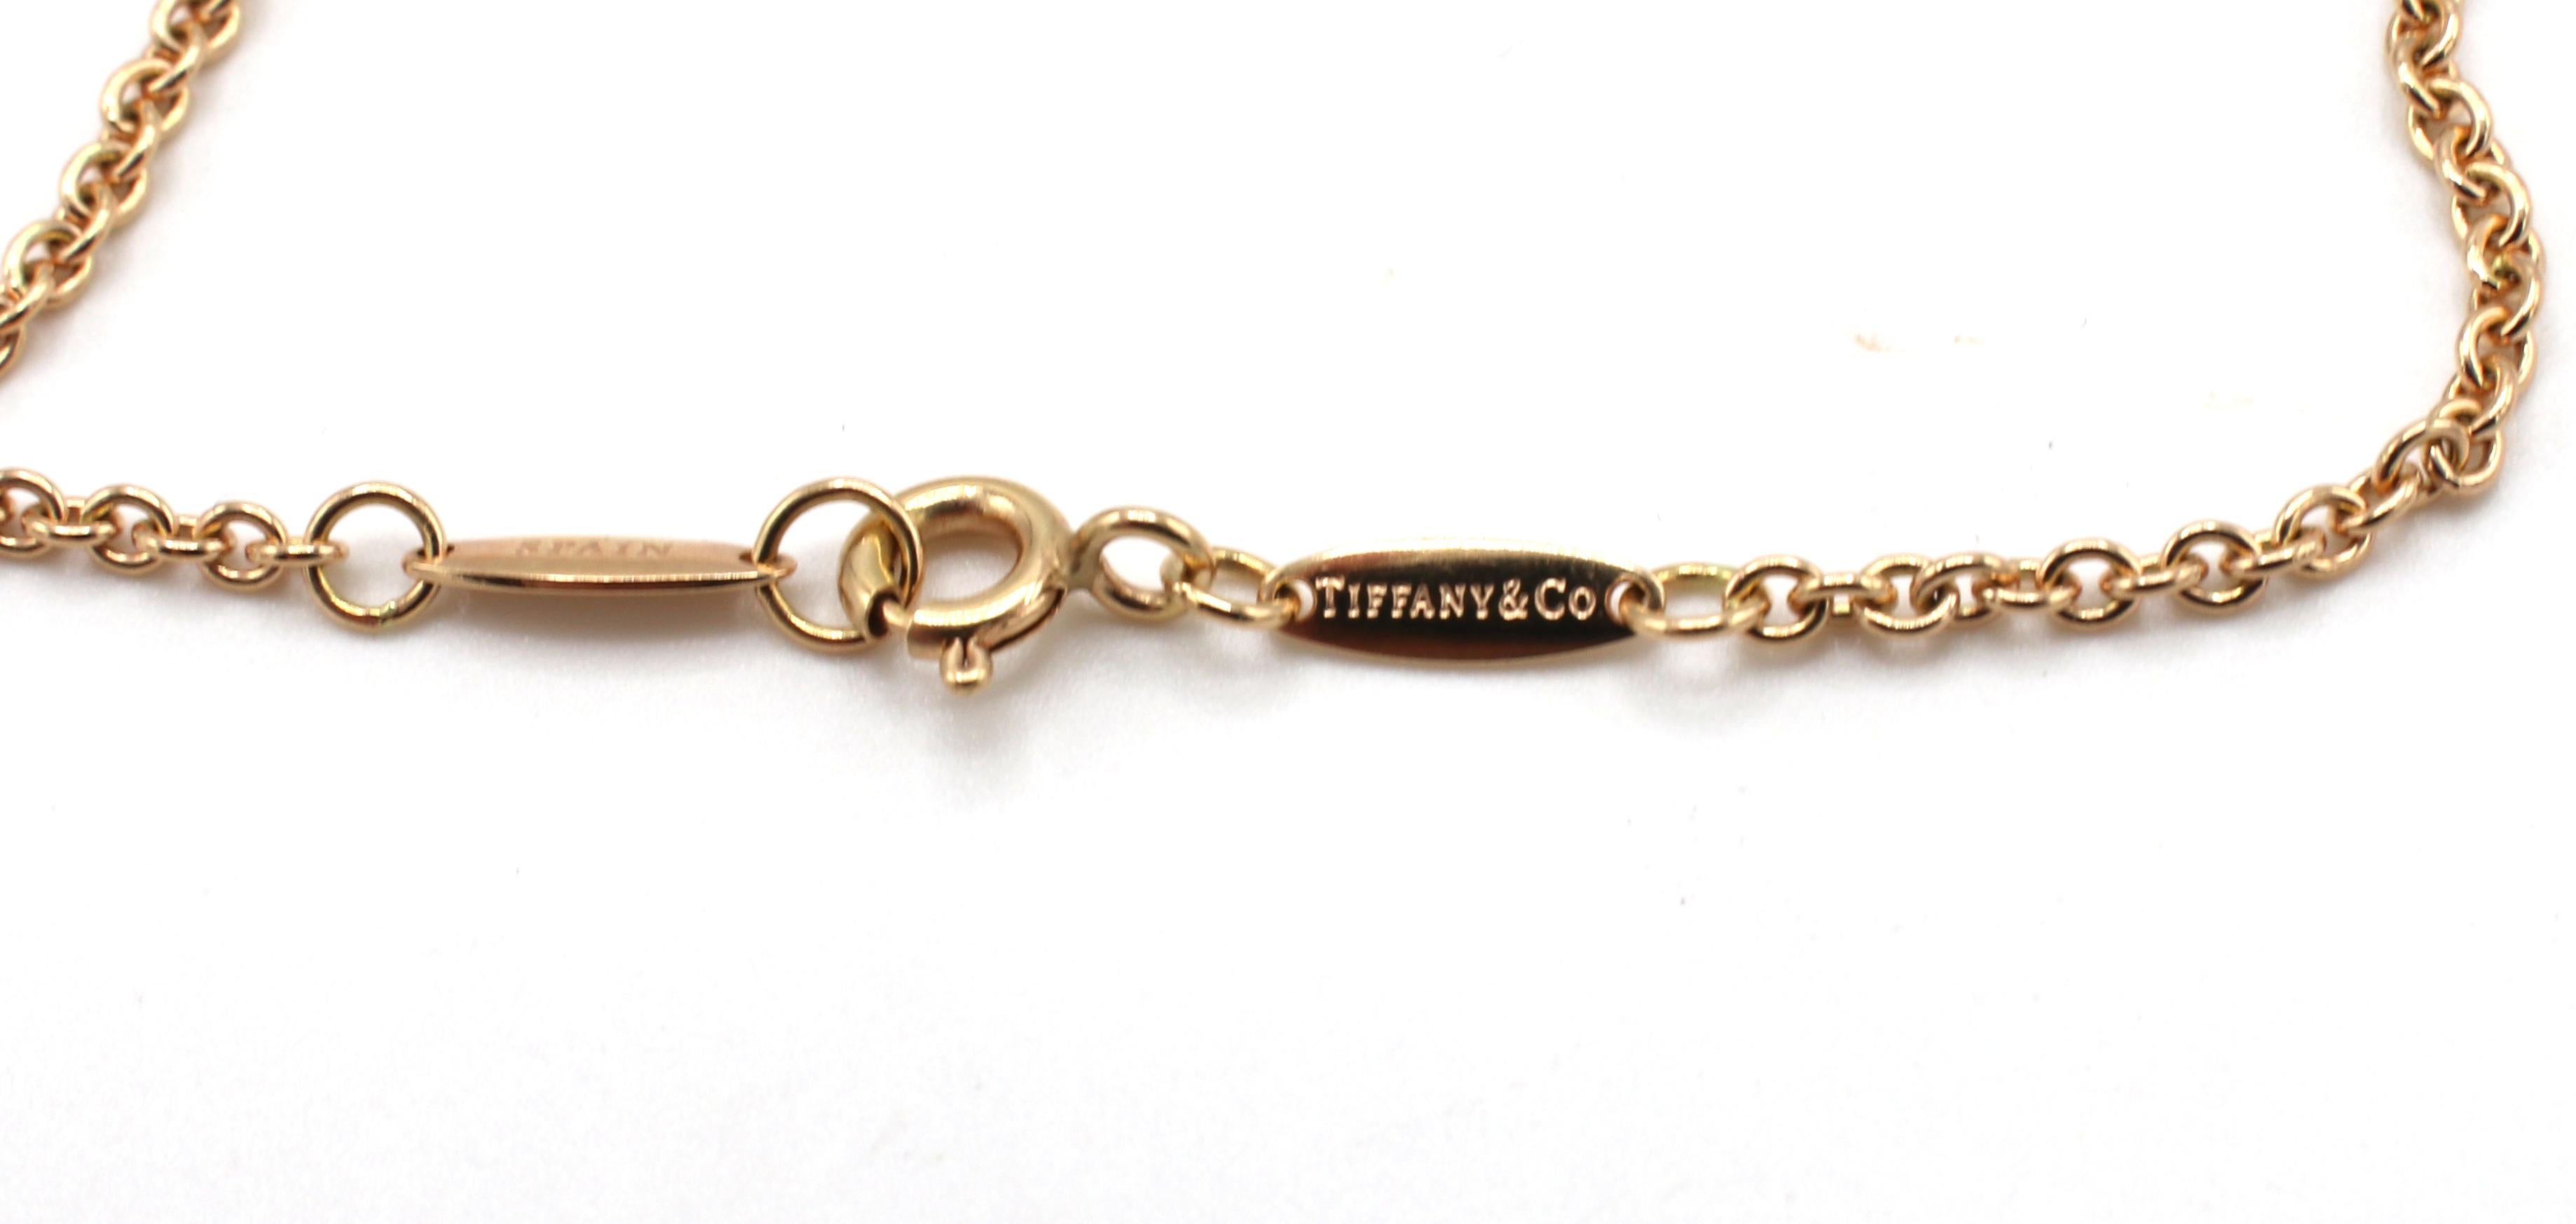 Tiffany & Co Elsa Peretti Open Heart Rose Gold Bracelet 
Metal: 18k rose gold
Weight: 3.56 grams
Heart: 11mm
Length: 7.25 inch
Retail: $825 (USD)
Signed: Tiffany & Co. Au750 PERETTI SPAIN